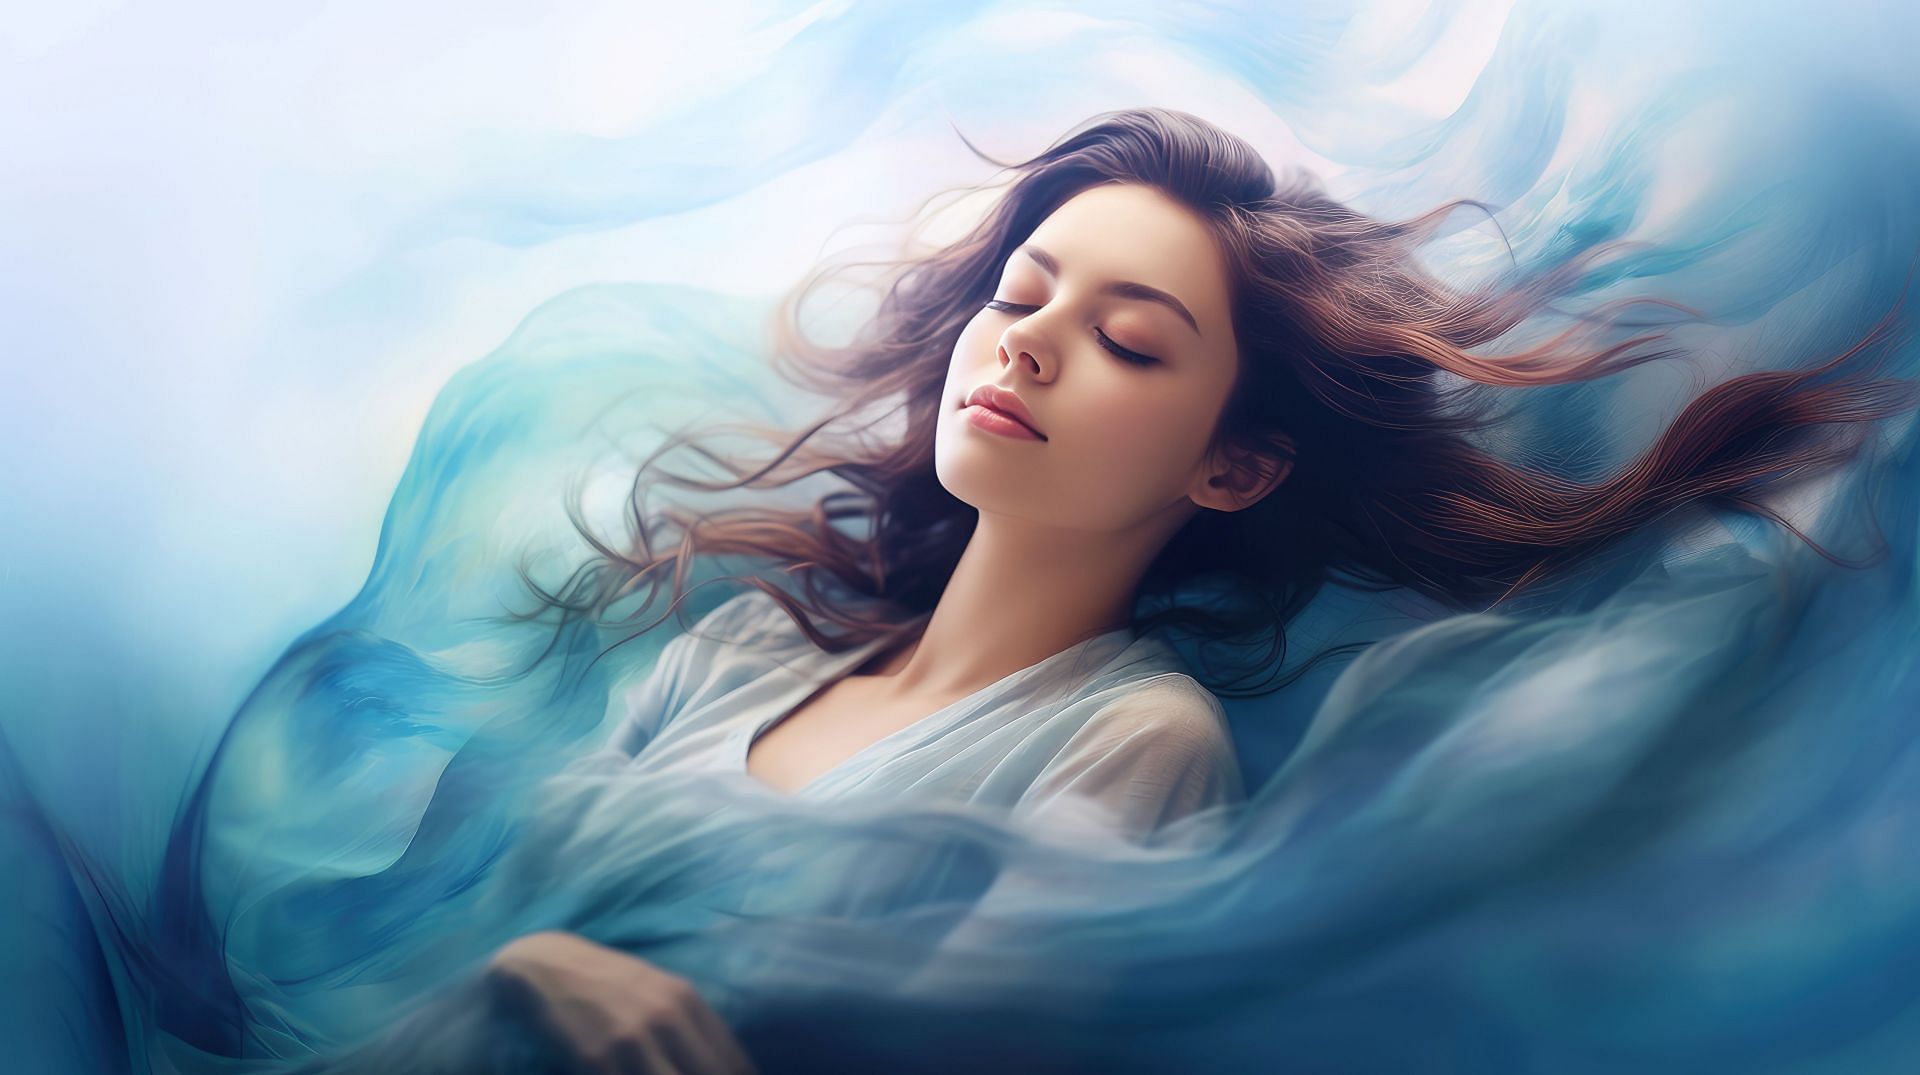 Hypnosis is a dream-like state that allows you to gather information from your subconscious. (Image via Vecteezy/ AITTHIPHONG KHONGTHONG)